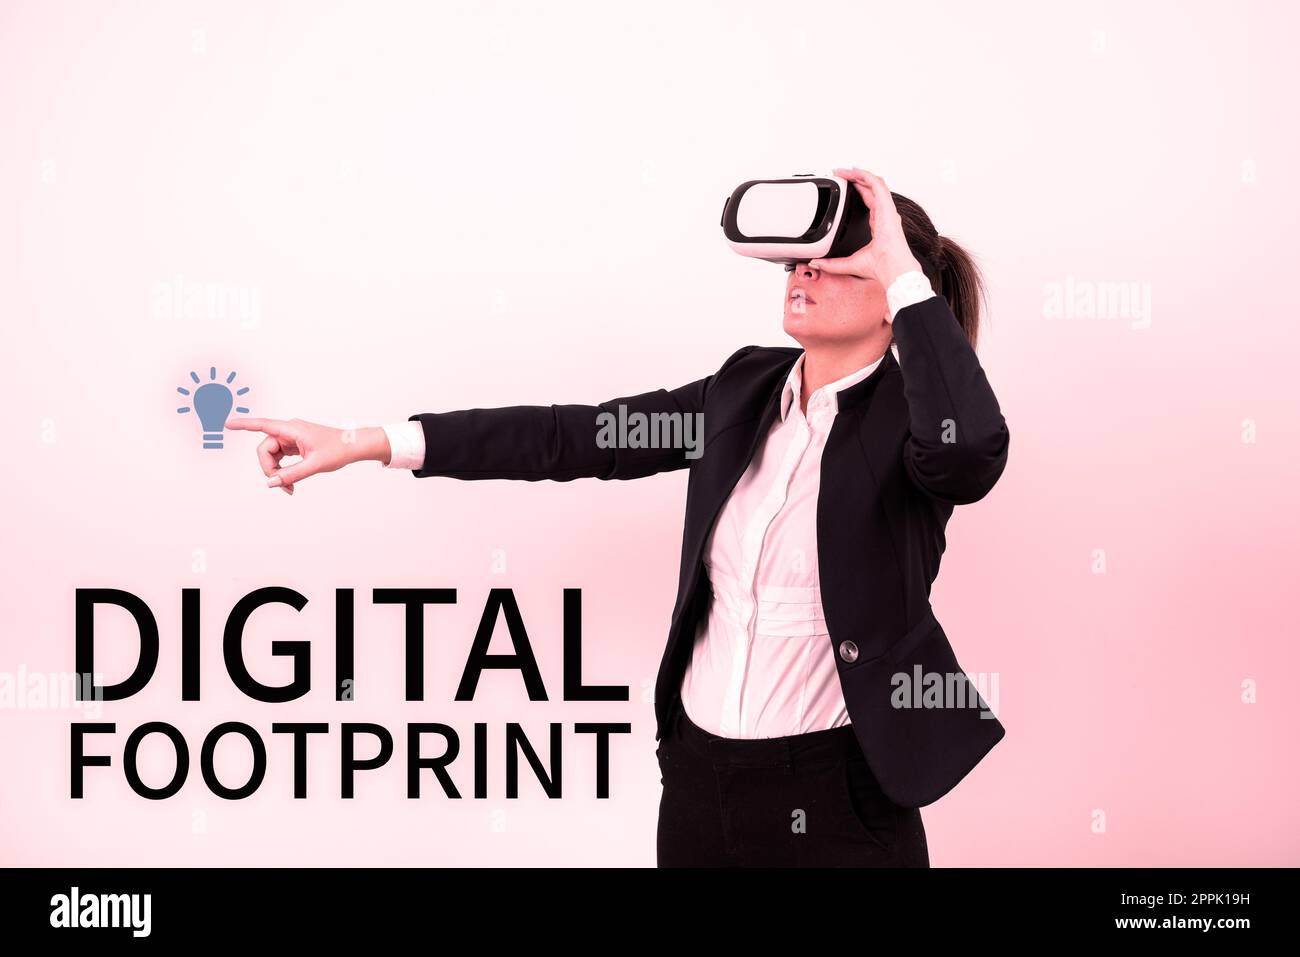 Handwriting text Digital Footprint. Business idea uses digital technology to operate the manufacturing process Stock Photo